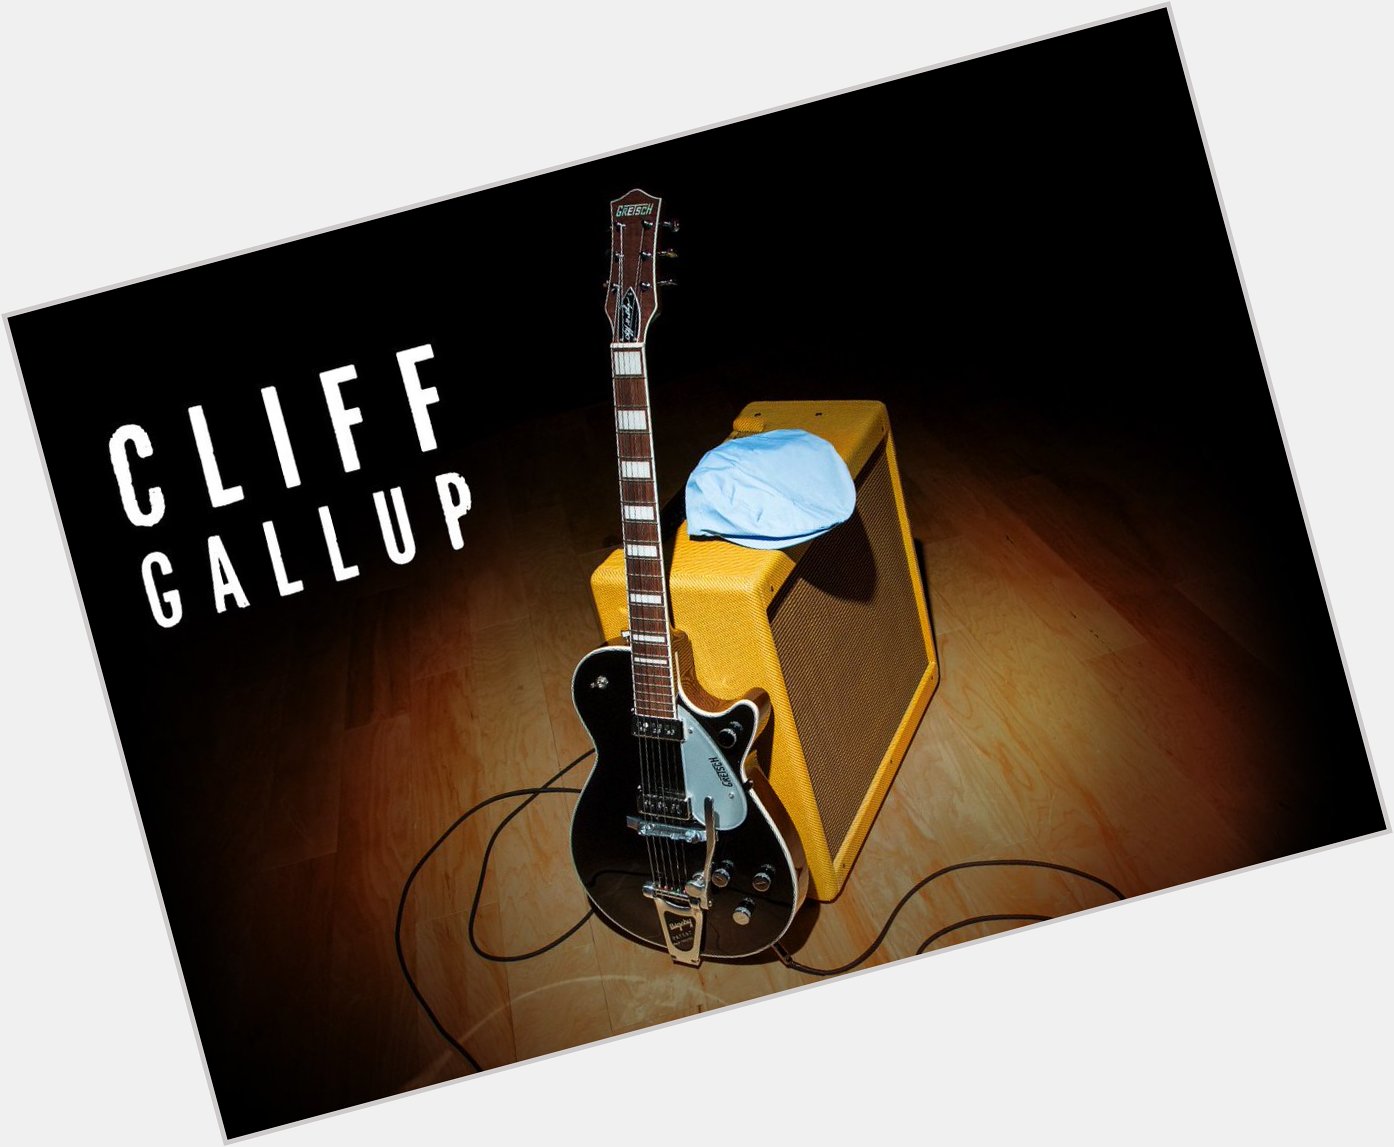 Happy Belated Birthday to the legendary Cliff Gallup. RIP =) 